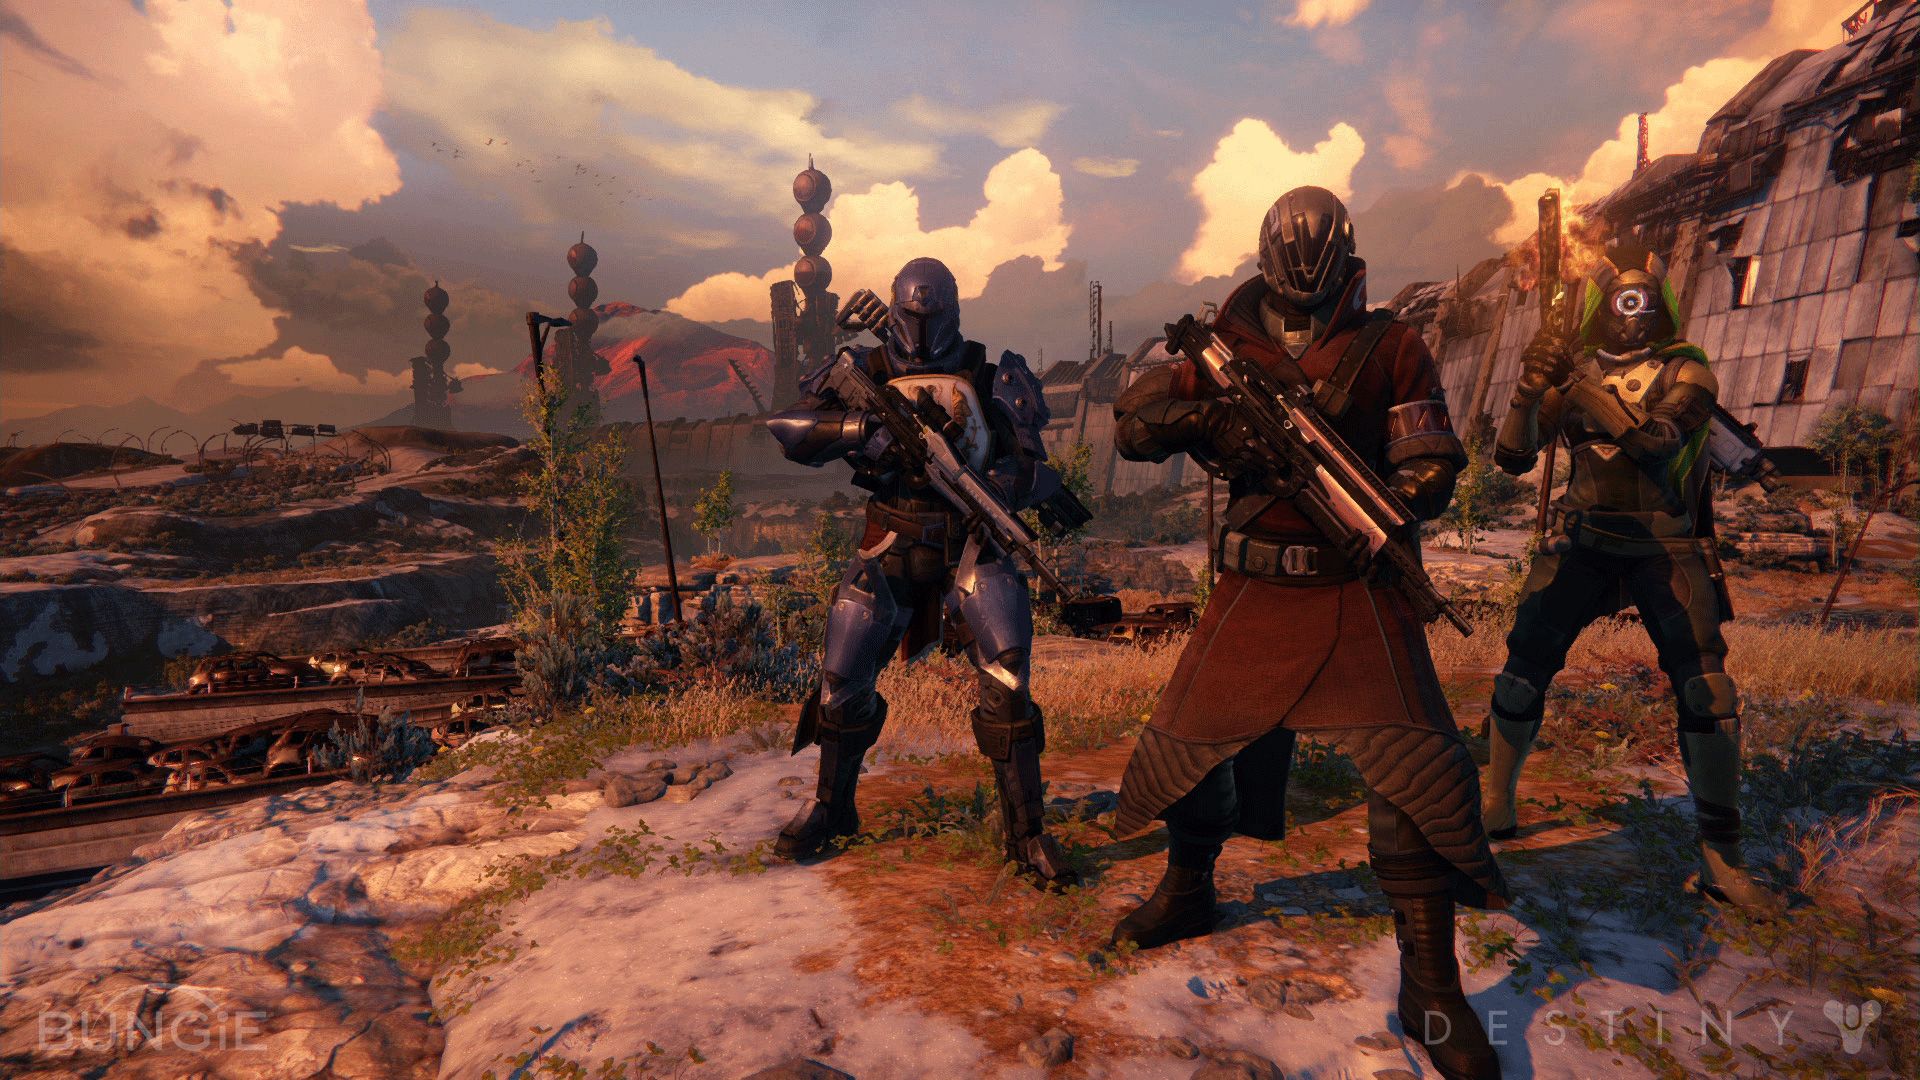 Destiny S Graphics Will Be Different On The Ps4 Than Xbox One